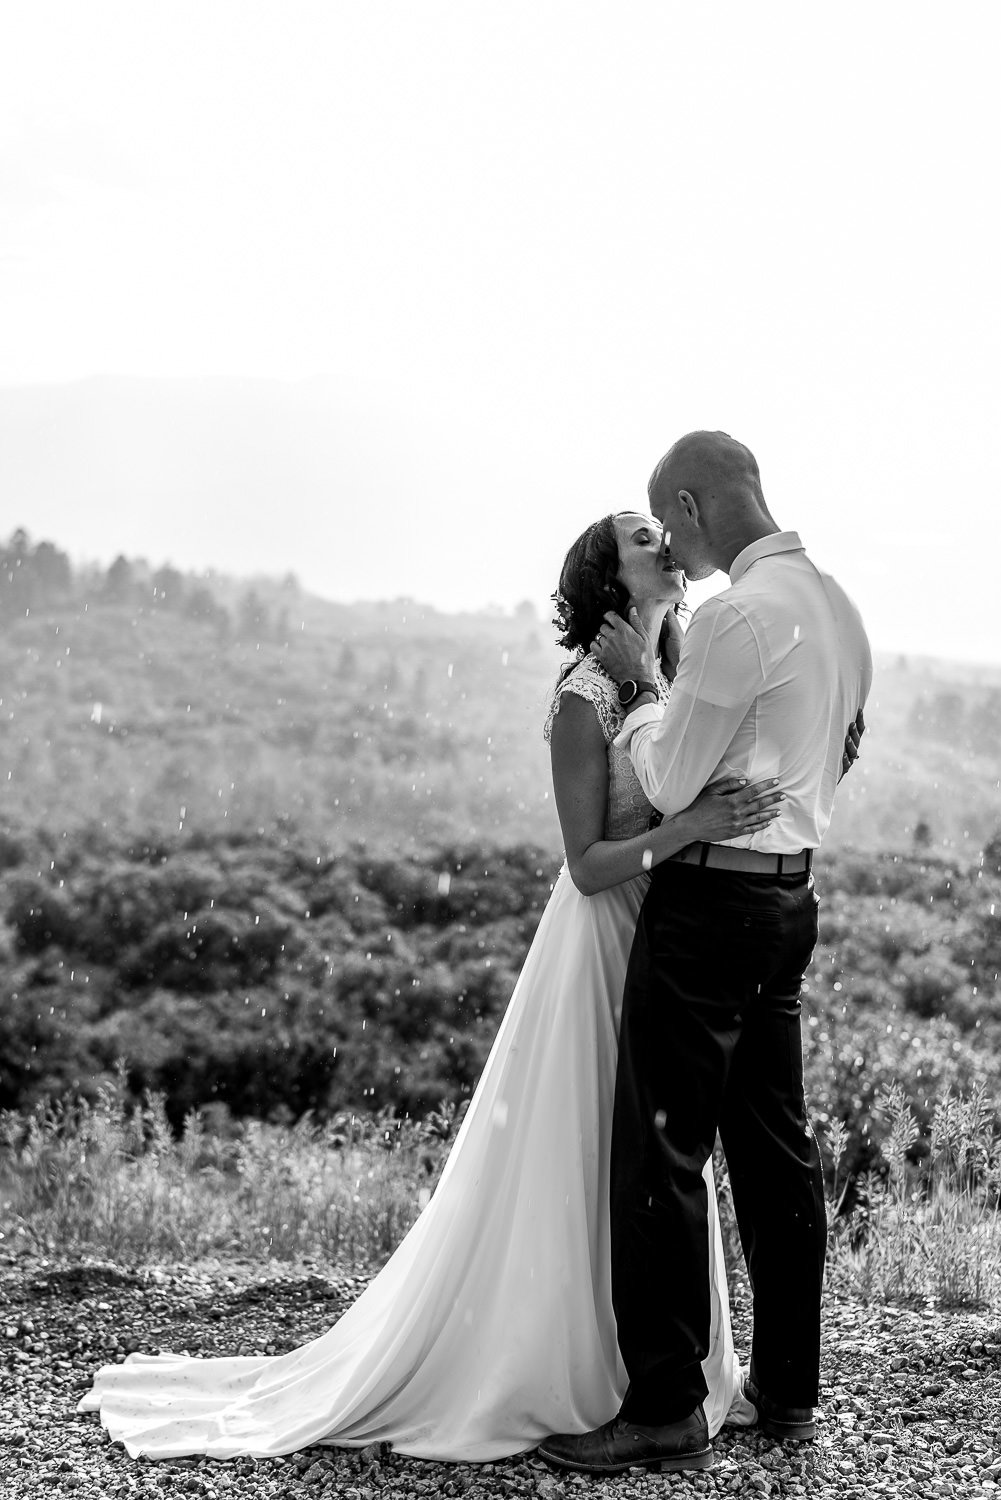 An intimate elopement photo capturing a bride and groom kissing on a picturesque hillside.